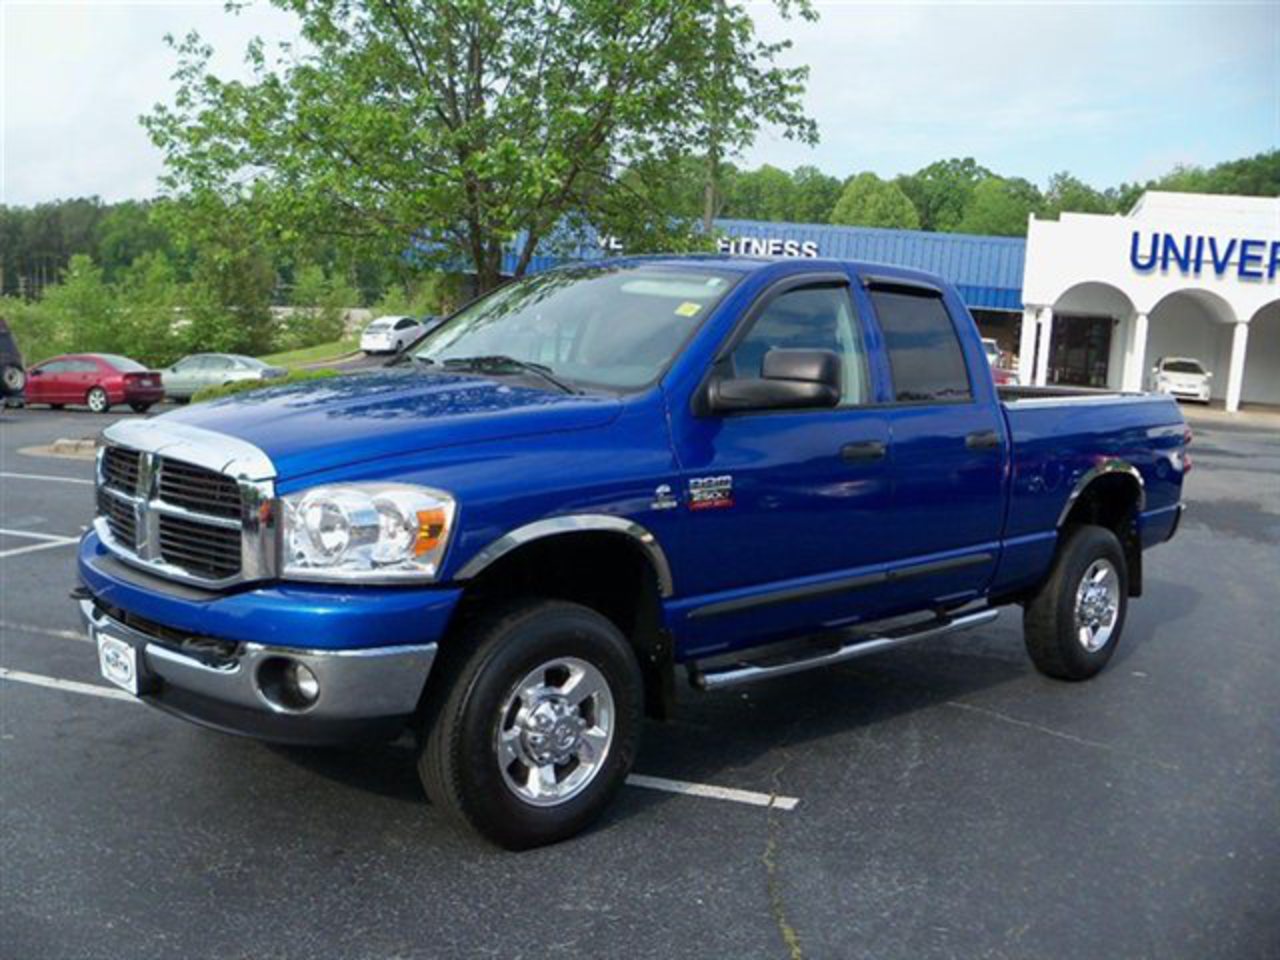 2007 Dodge Ram 2500 Extended Cab Diesel 4x4 | Mitula Cars